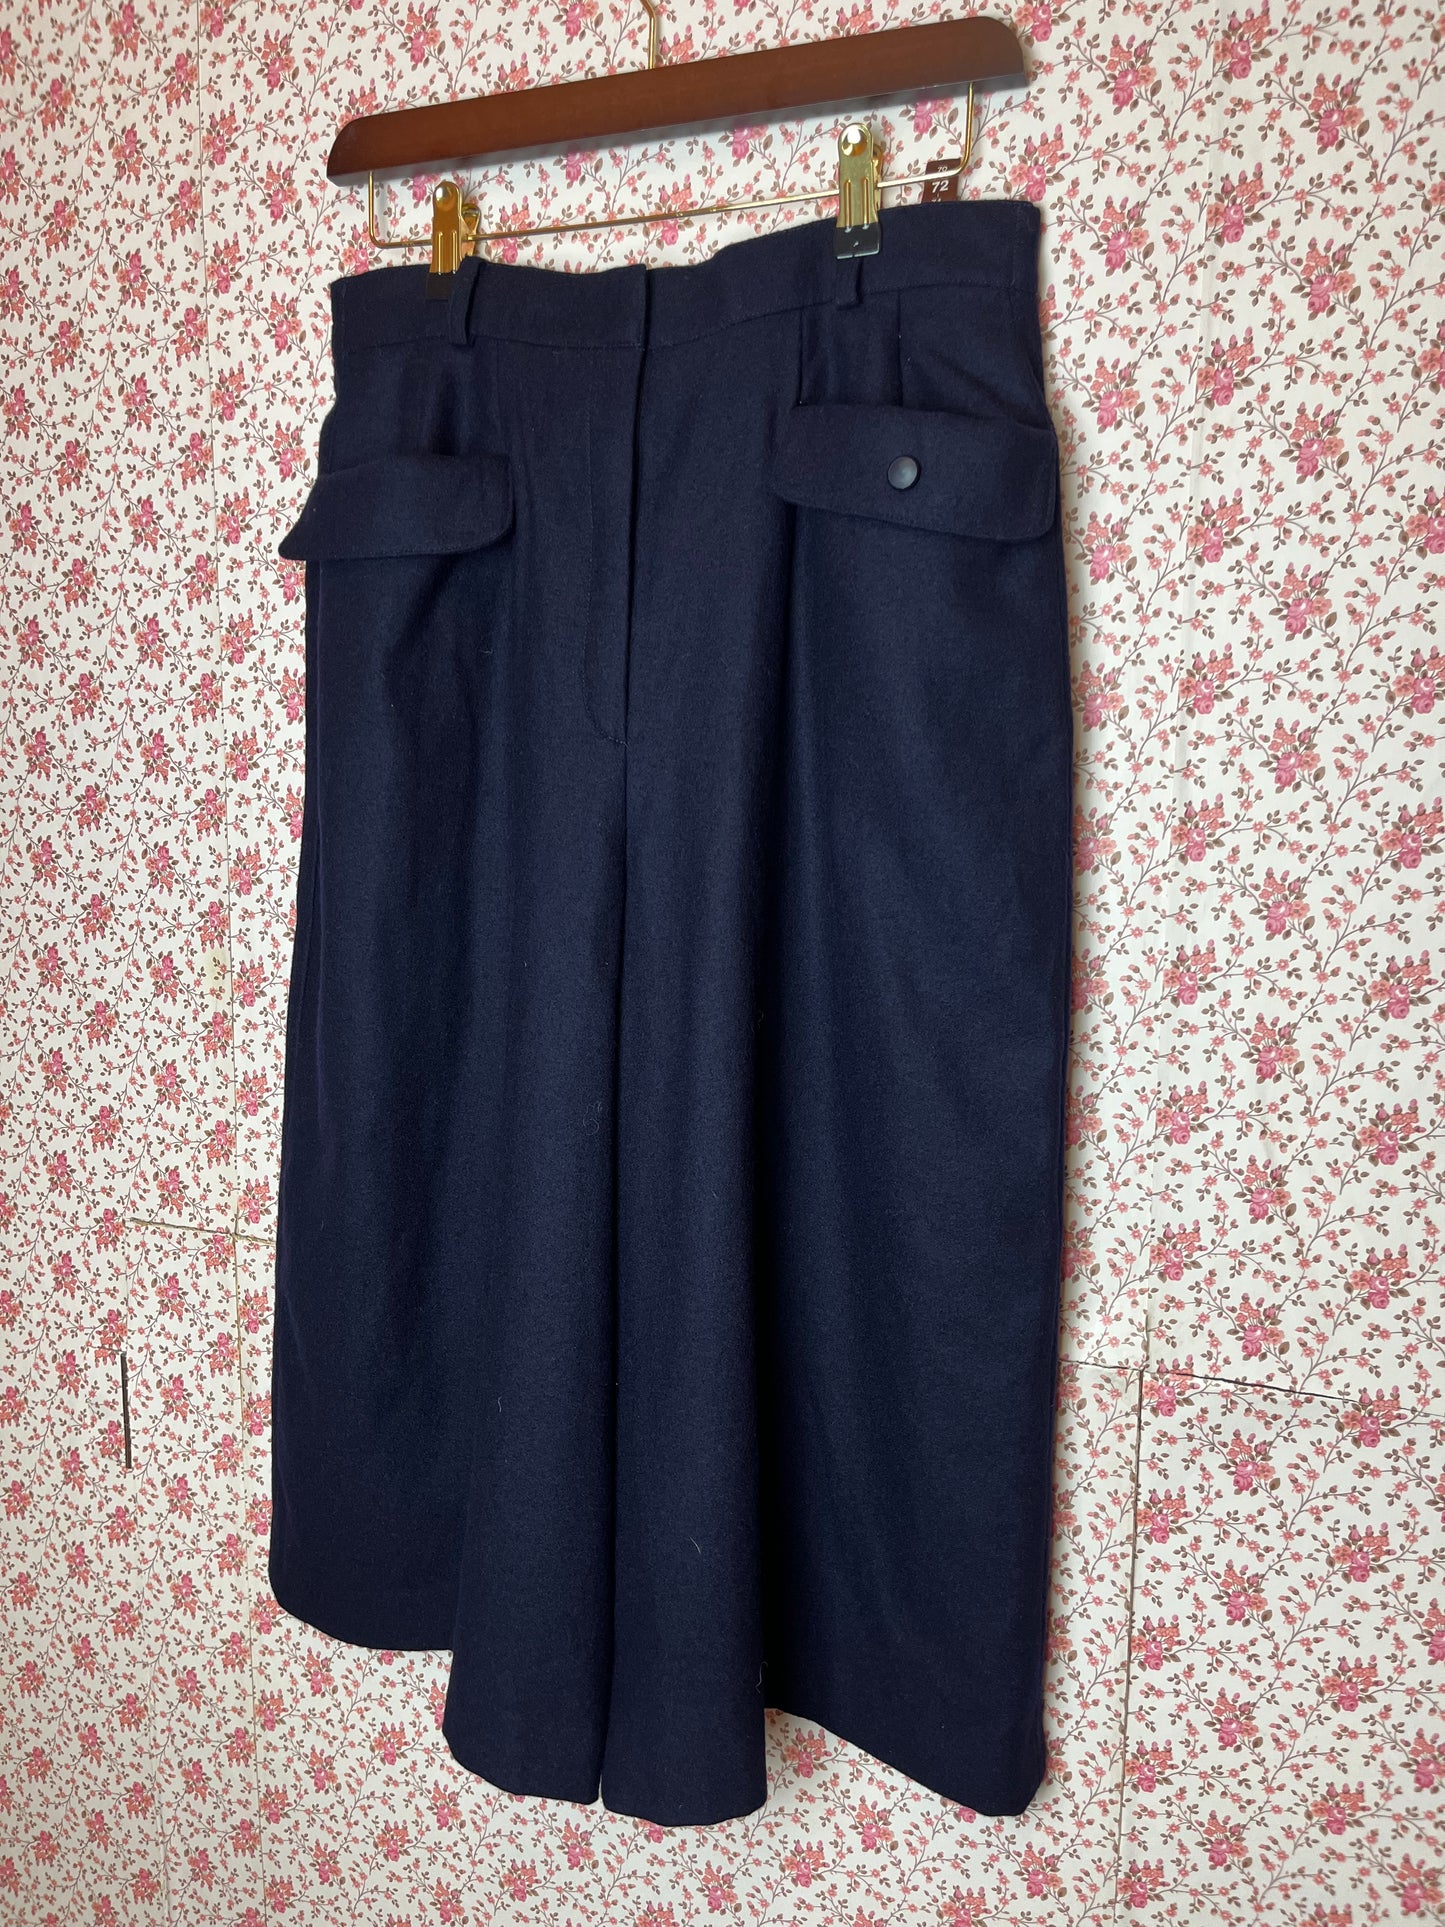 Vintage 1940s Navy Pure Wool Japanese Culottes